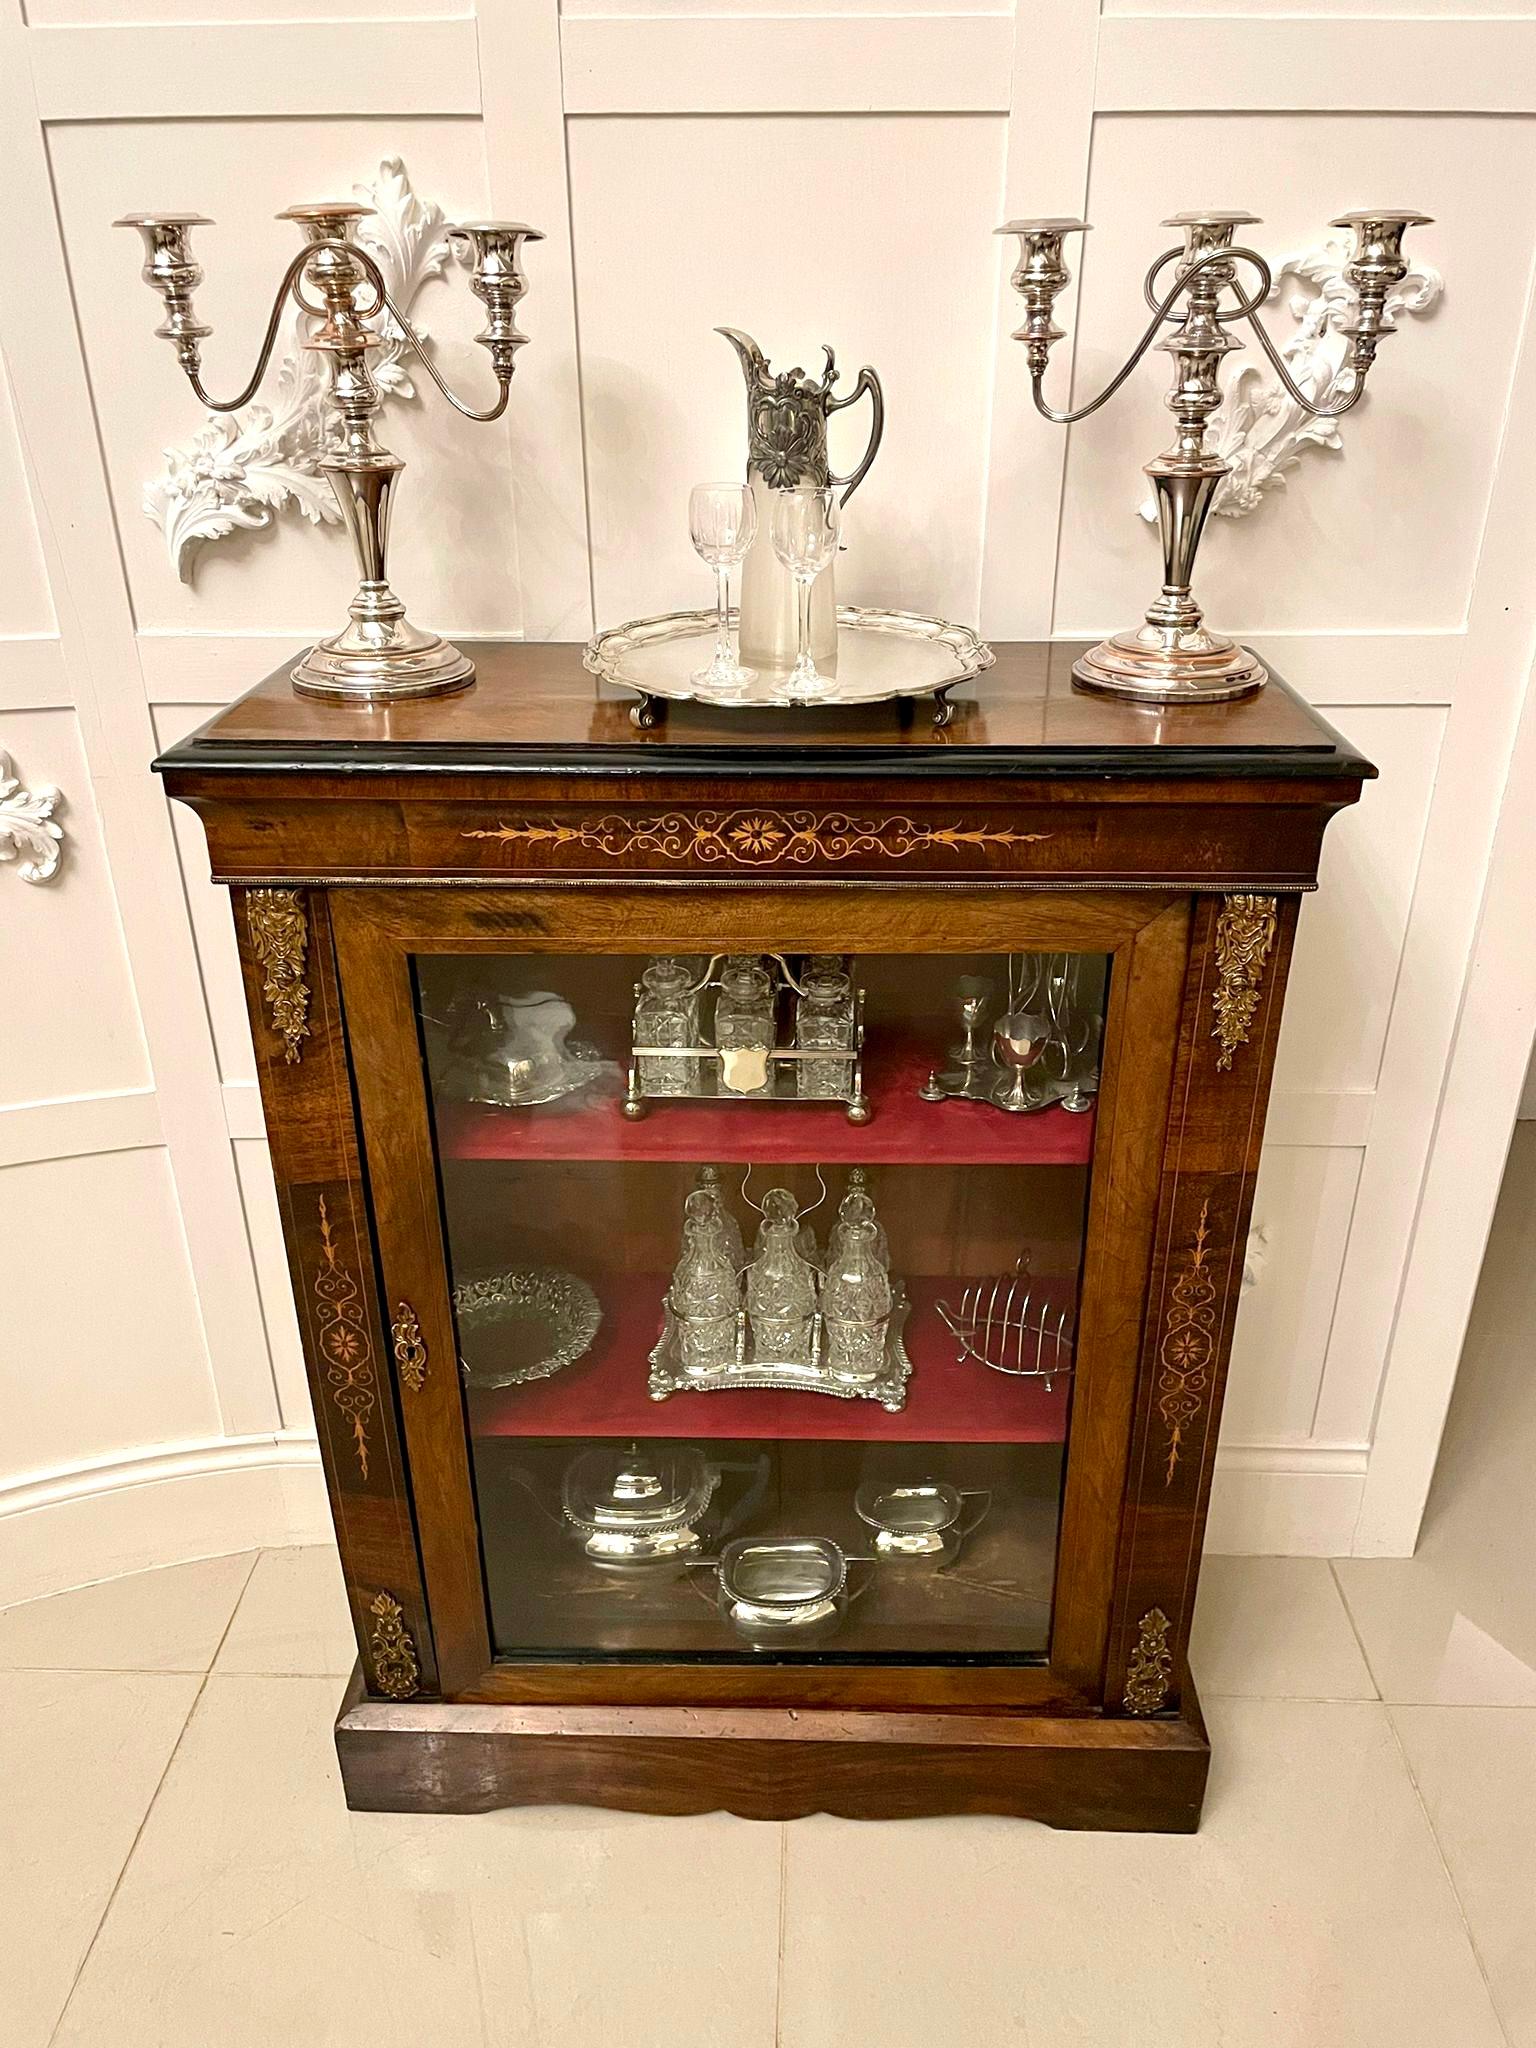 Antique Victorian figured walnut inlaid display cabinet having a quality figured walnut top with a moulded edge above a shaped frieze with satinwood inlay and gilded brass beading, one single glazed walnut door opening to reveal two shelves, gilded